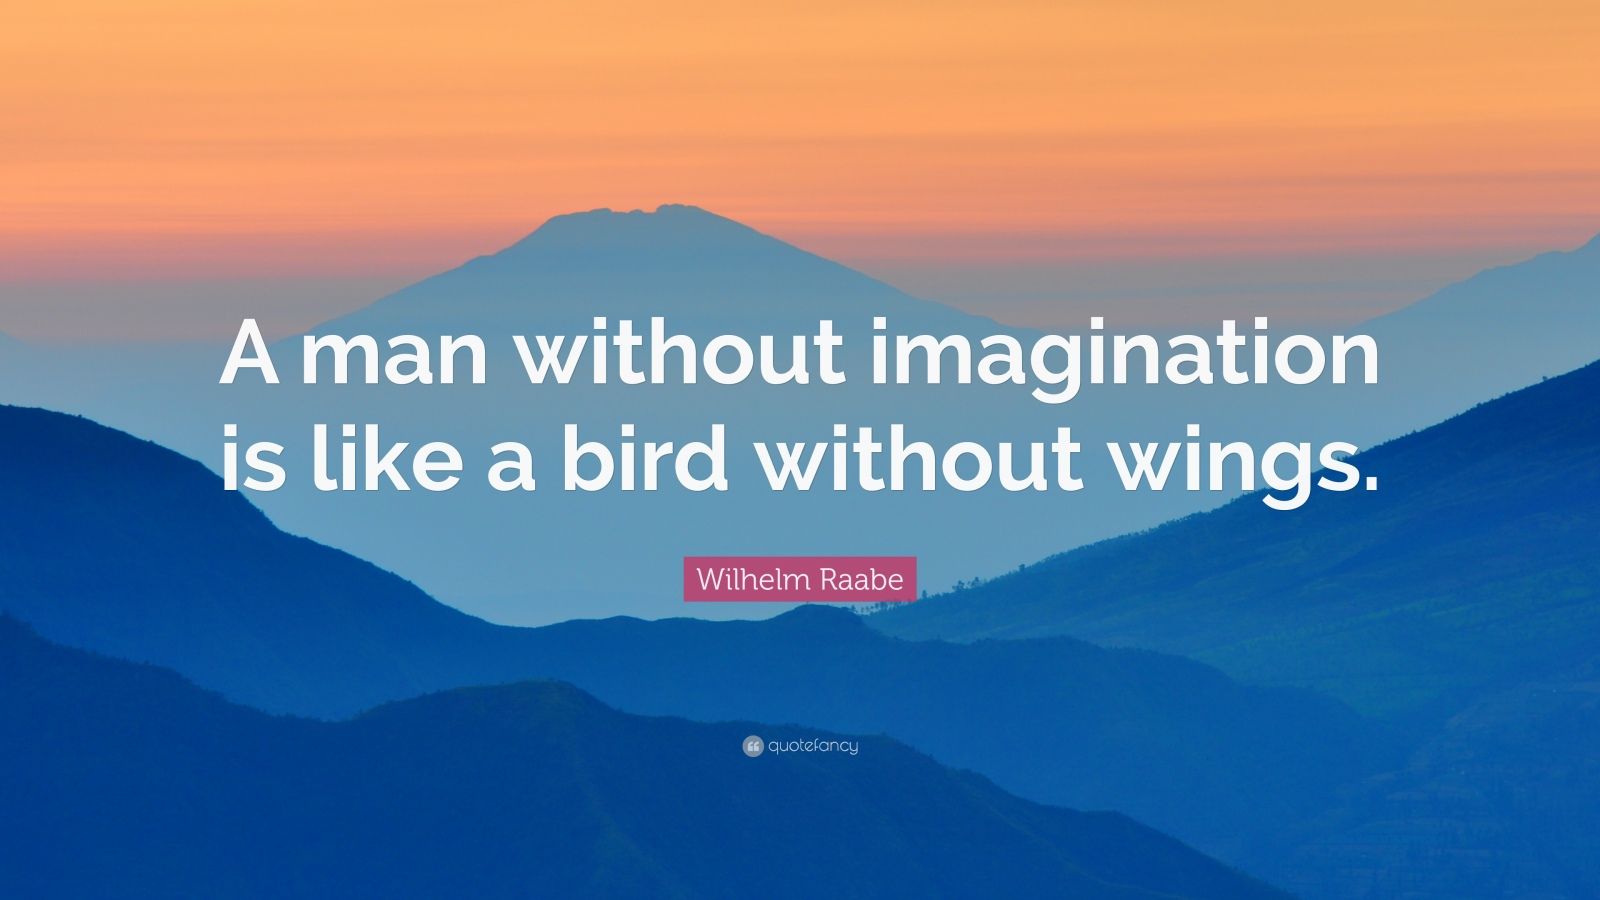 Wilhelm Raabe Quote: “A man without imagination is like a bird without ...